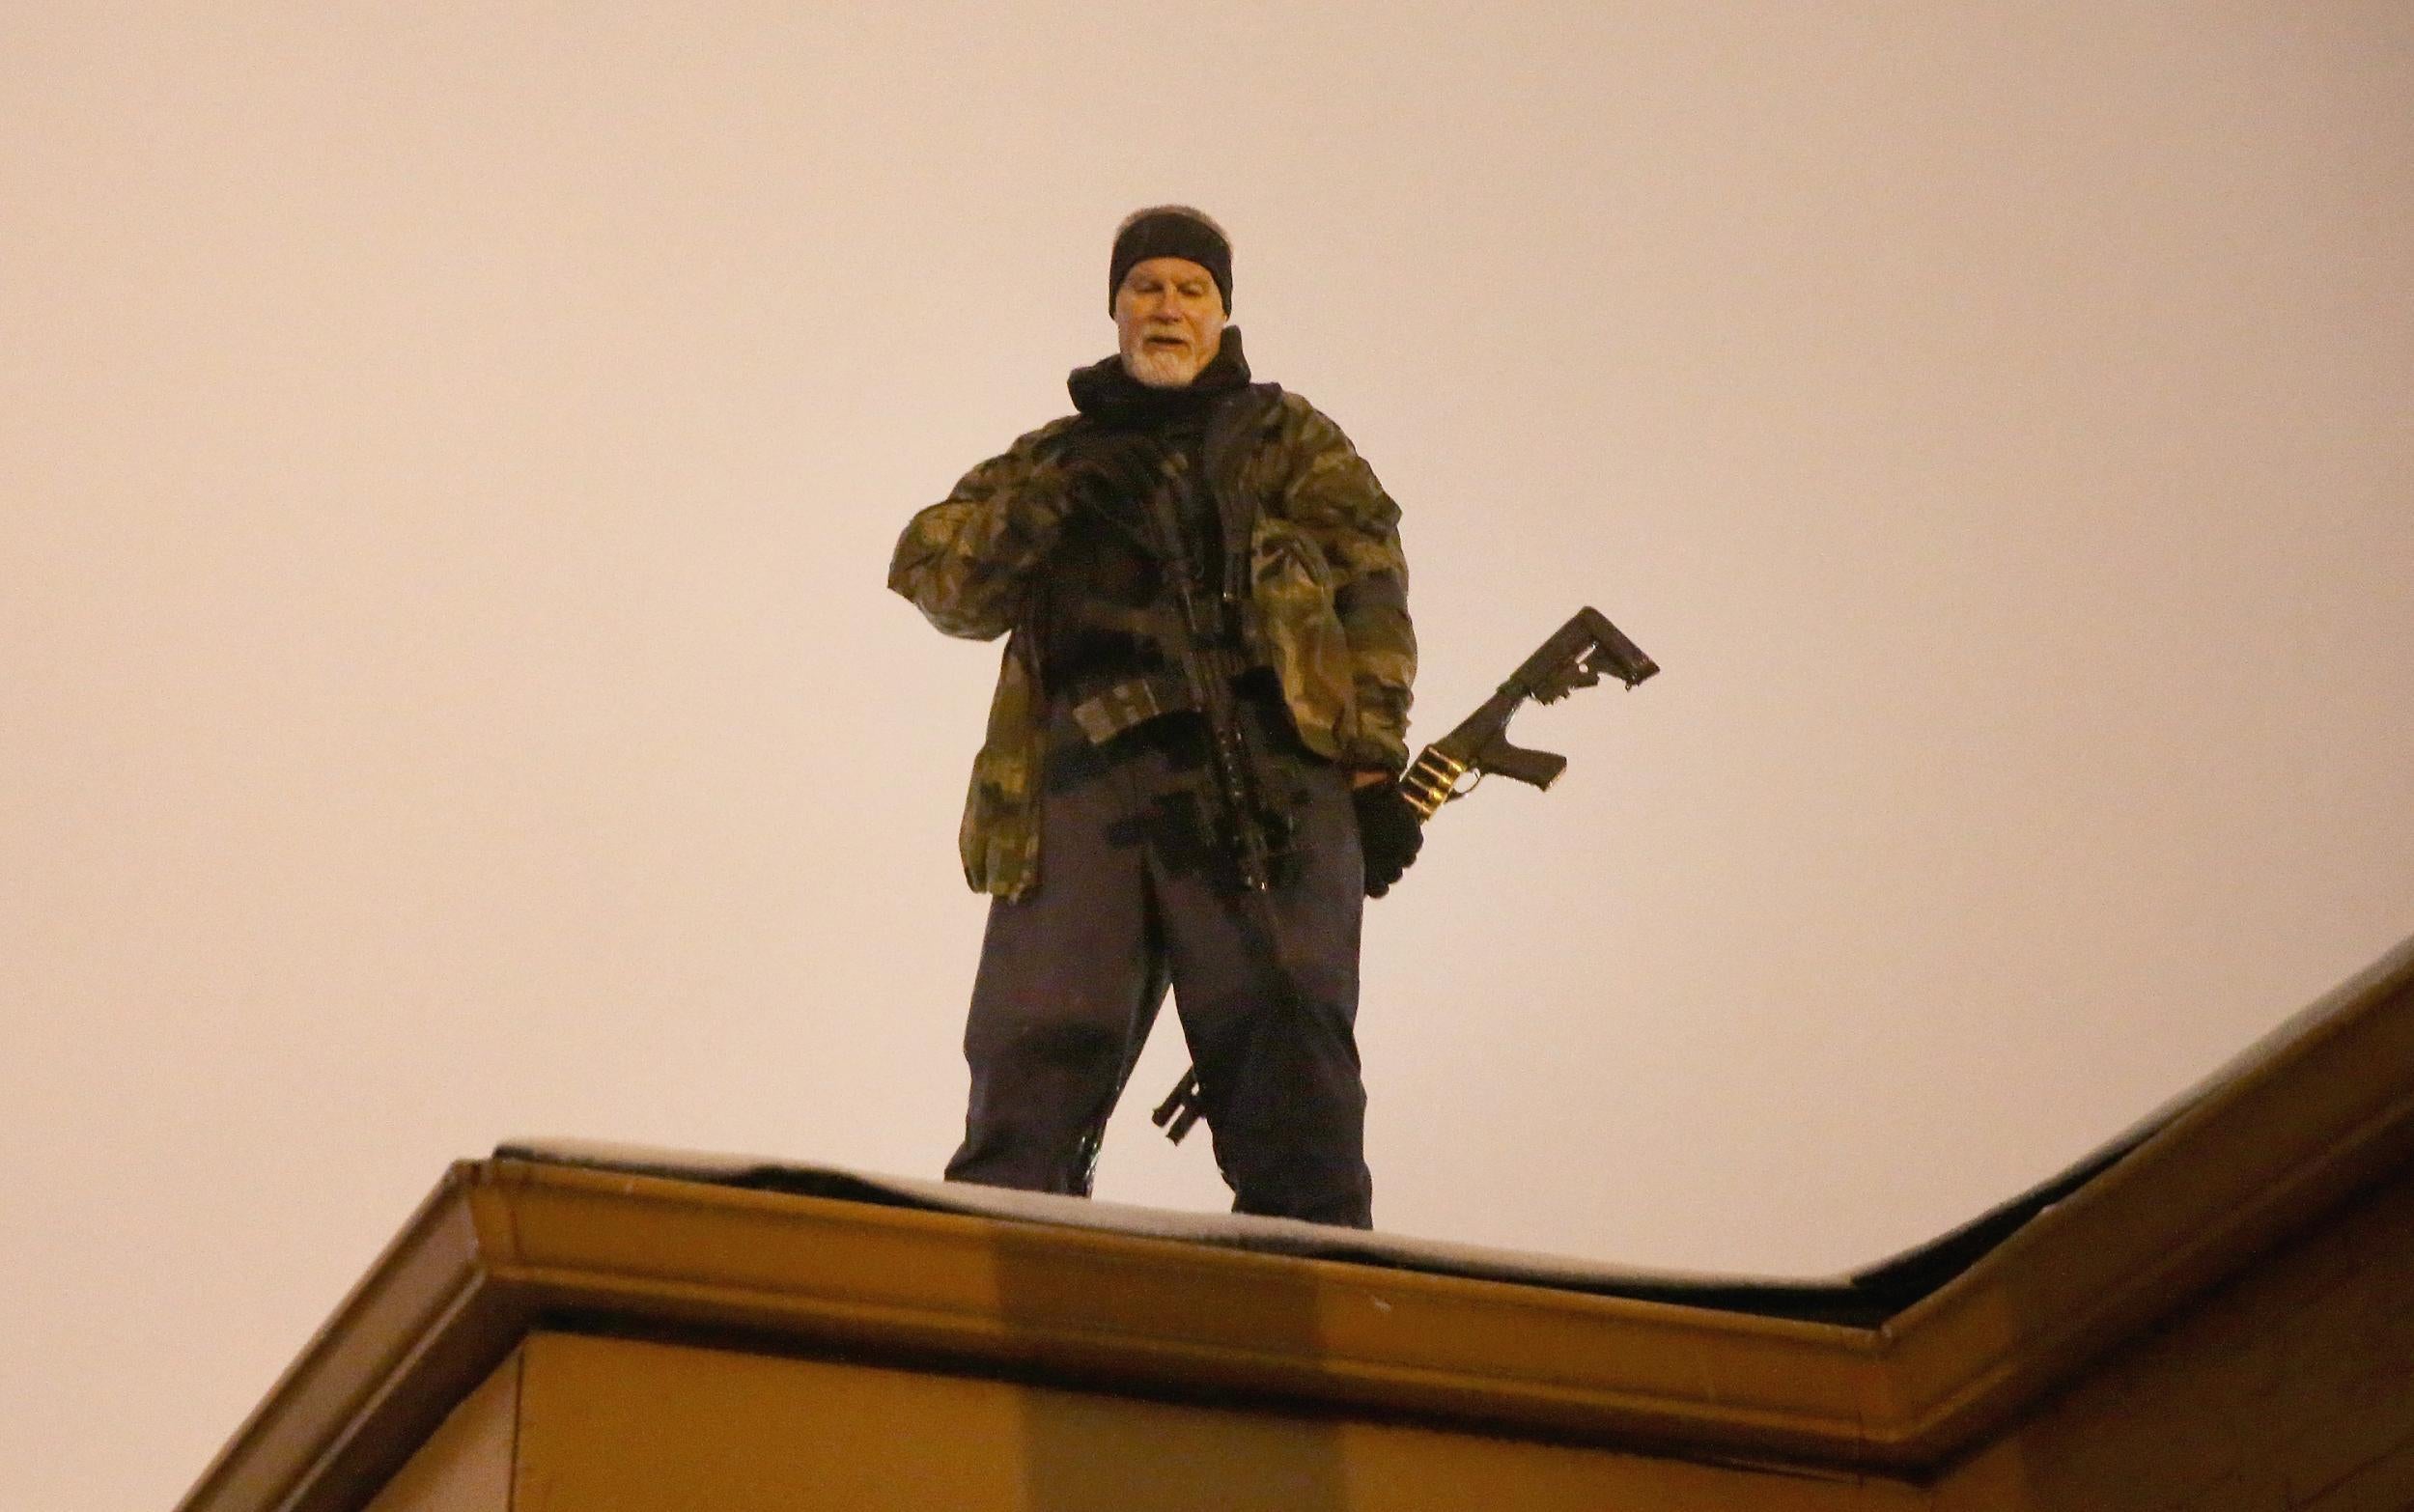 John Karriman. a volunteer from Oath Keepers, stands guard on the rooftop of a business in Ferguson, Missouri